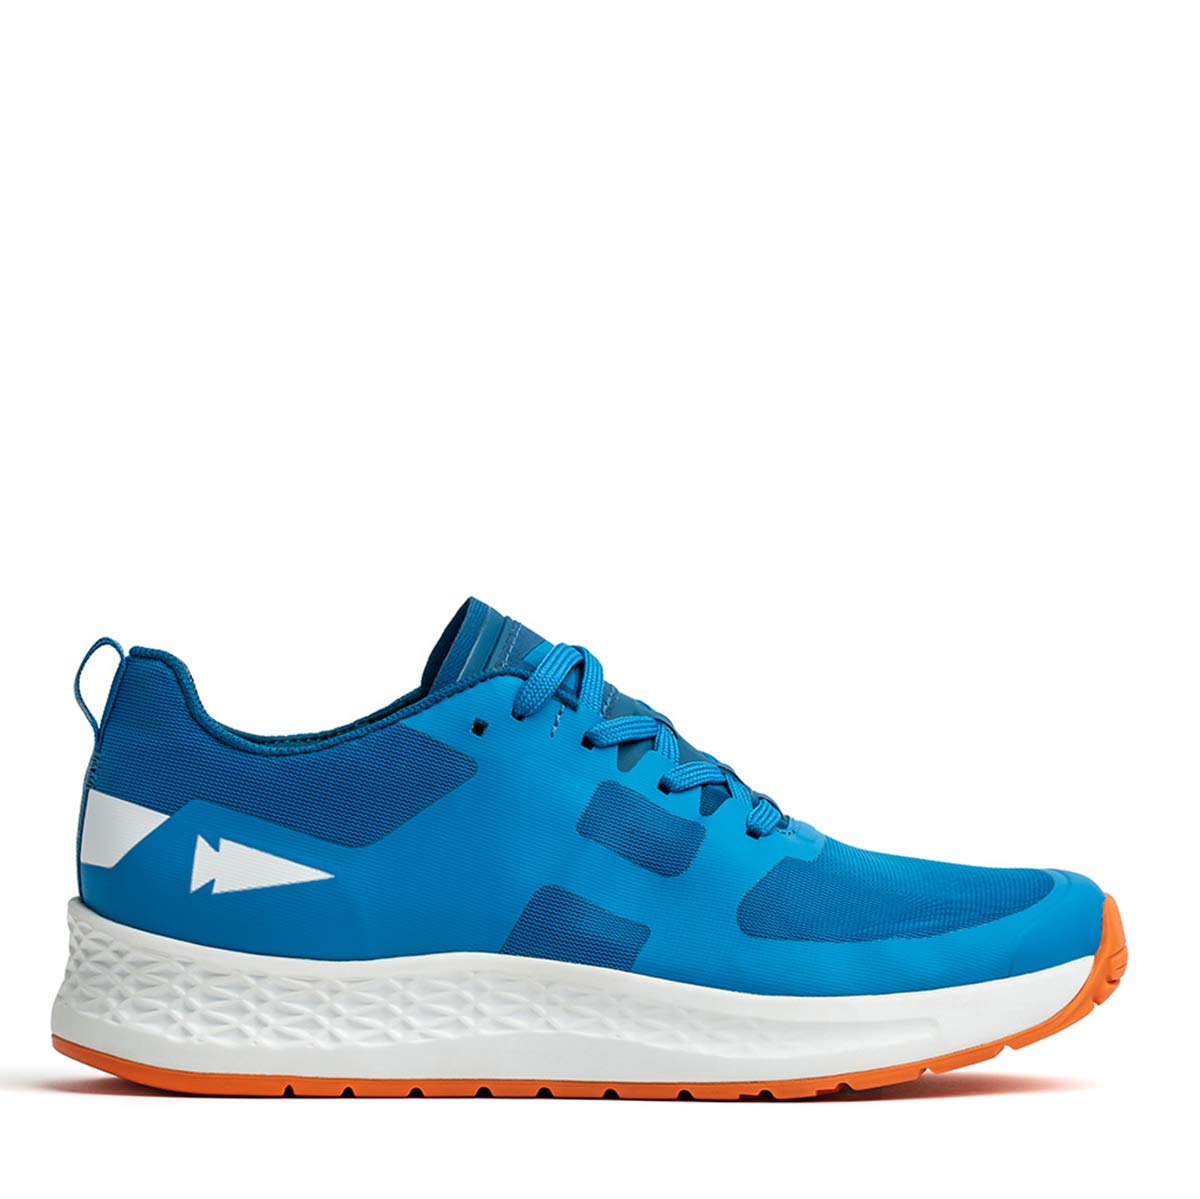 Men's Rough Runners - Electric Blue